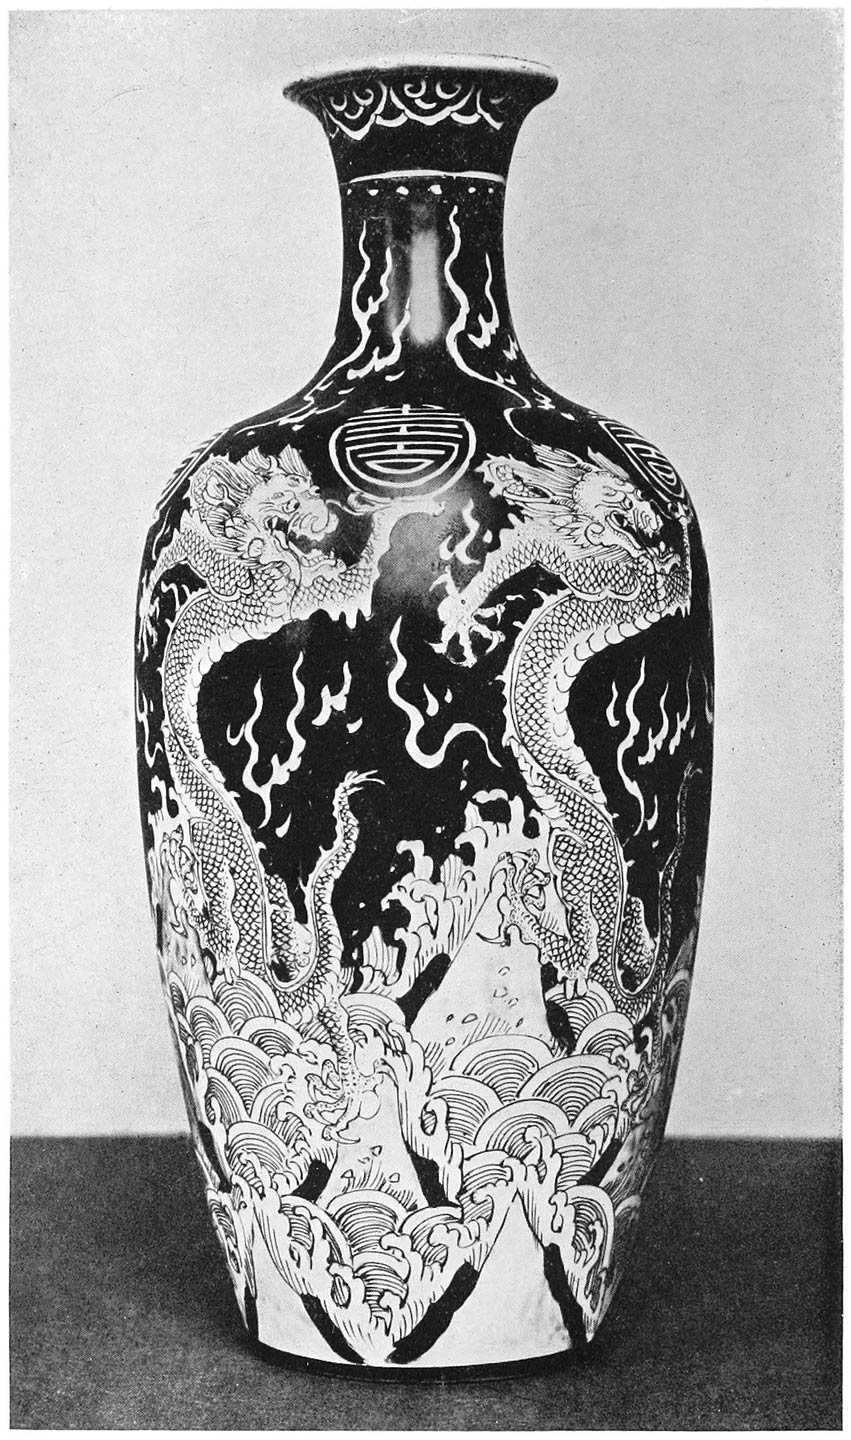 CHINESE PORCELAIN VASE DECORATED WITH FIVE-CLAWED DRAGONS RISING FROM WAVES